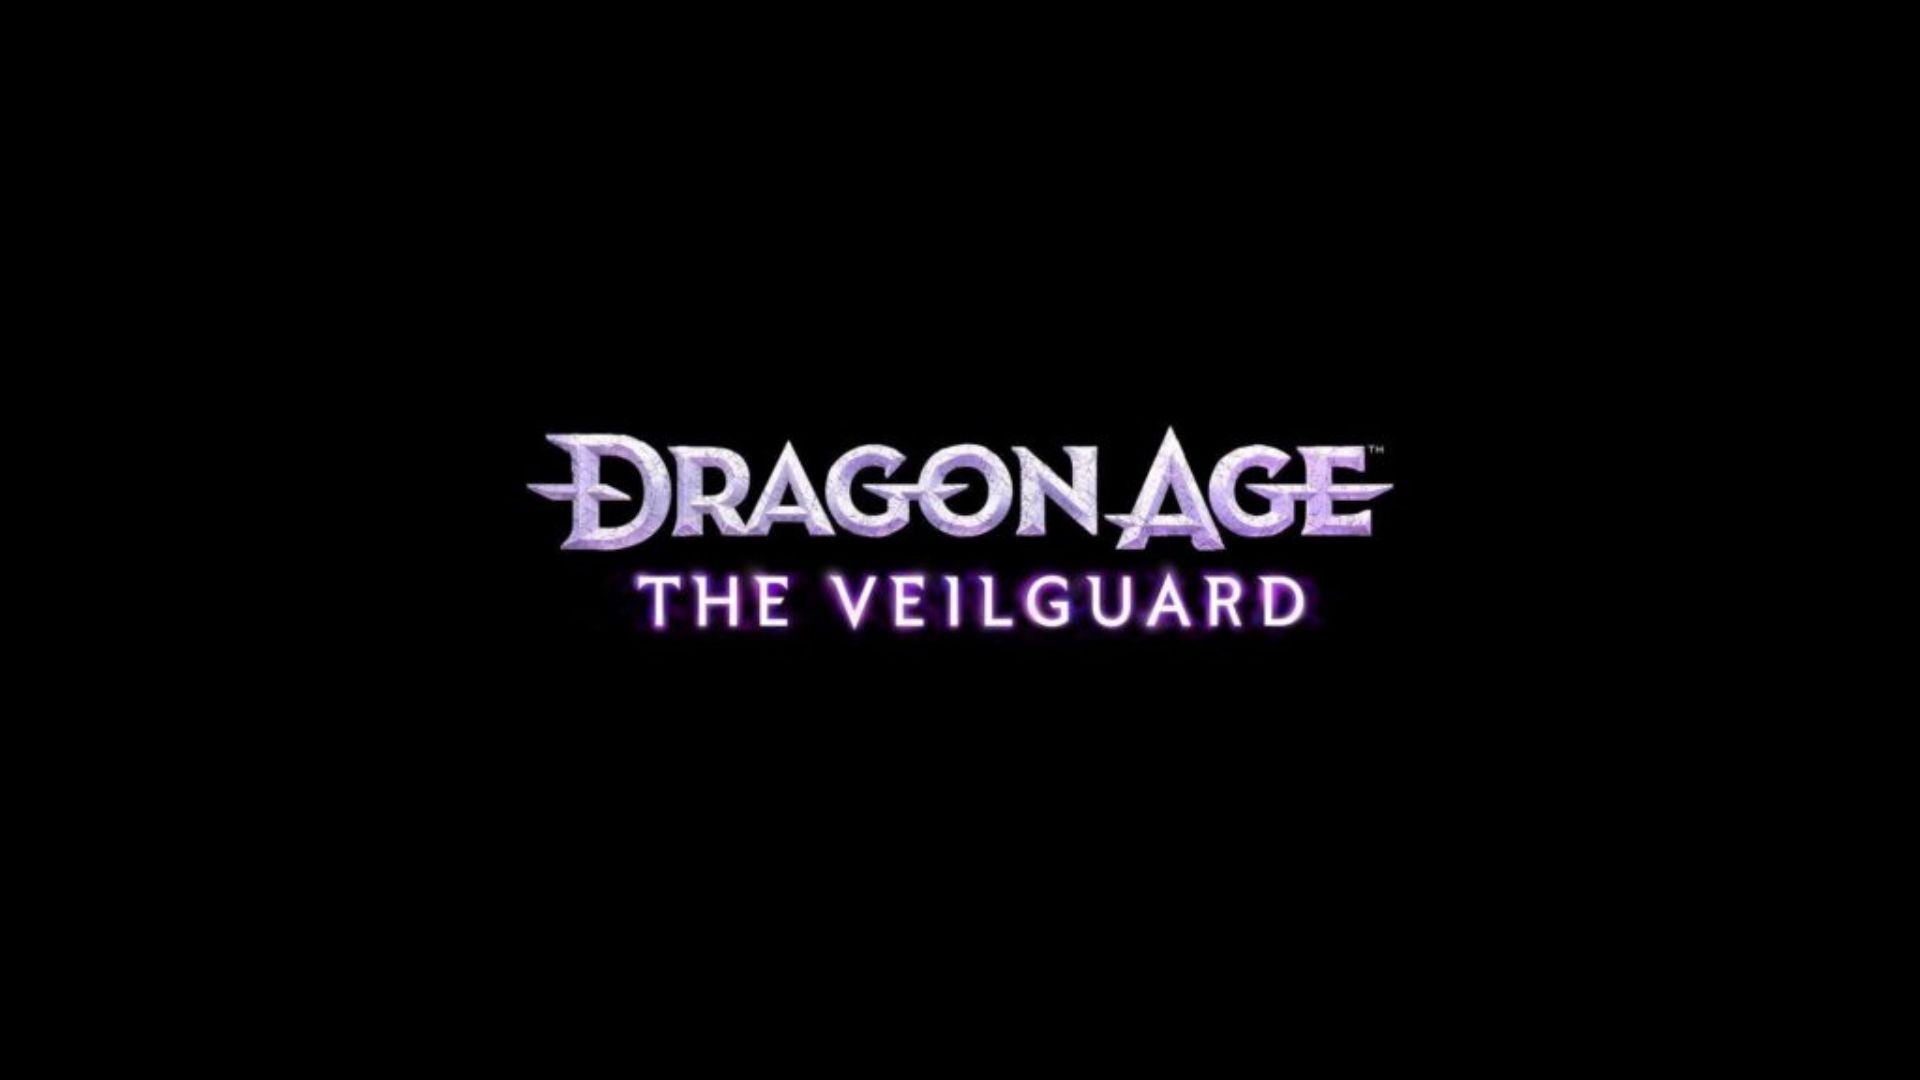 Dragon Age: The Veilguard Is The Next Iteration In The Beloved Franchise | Image Source: BioWare